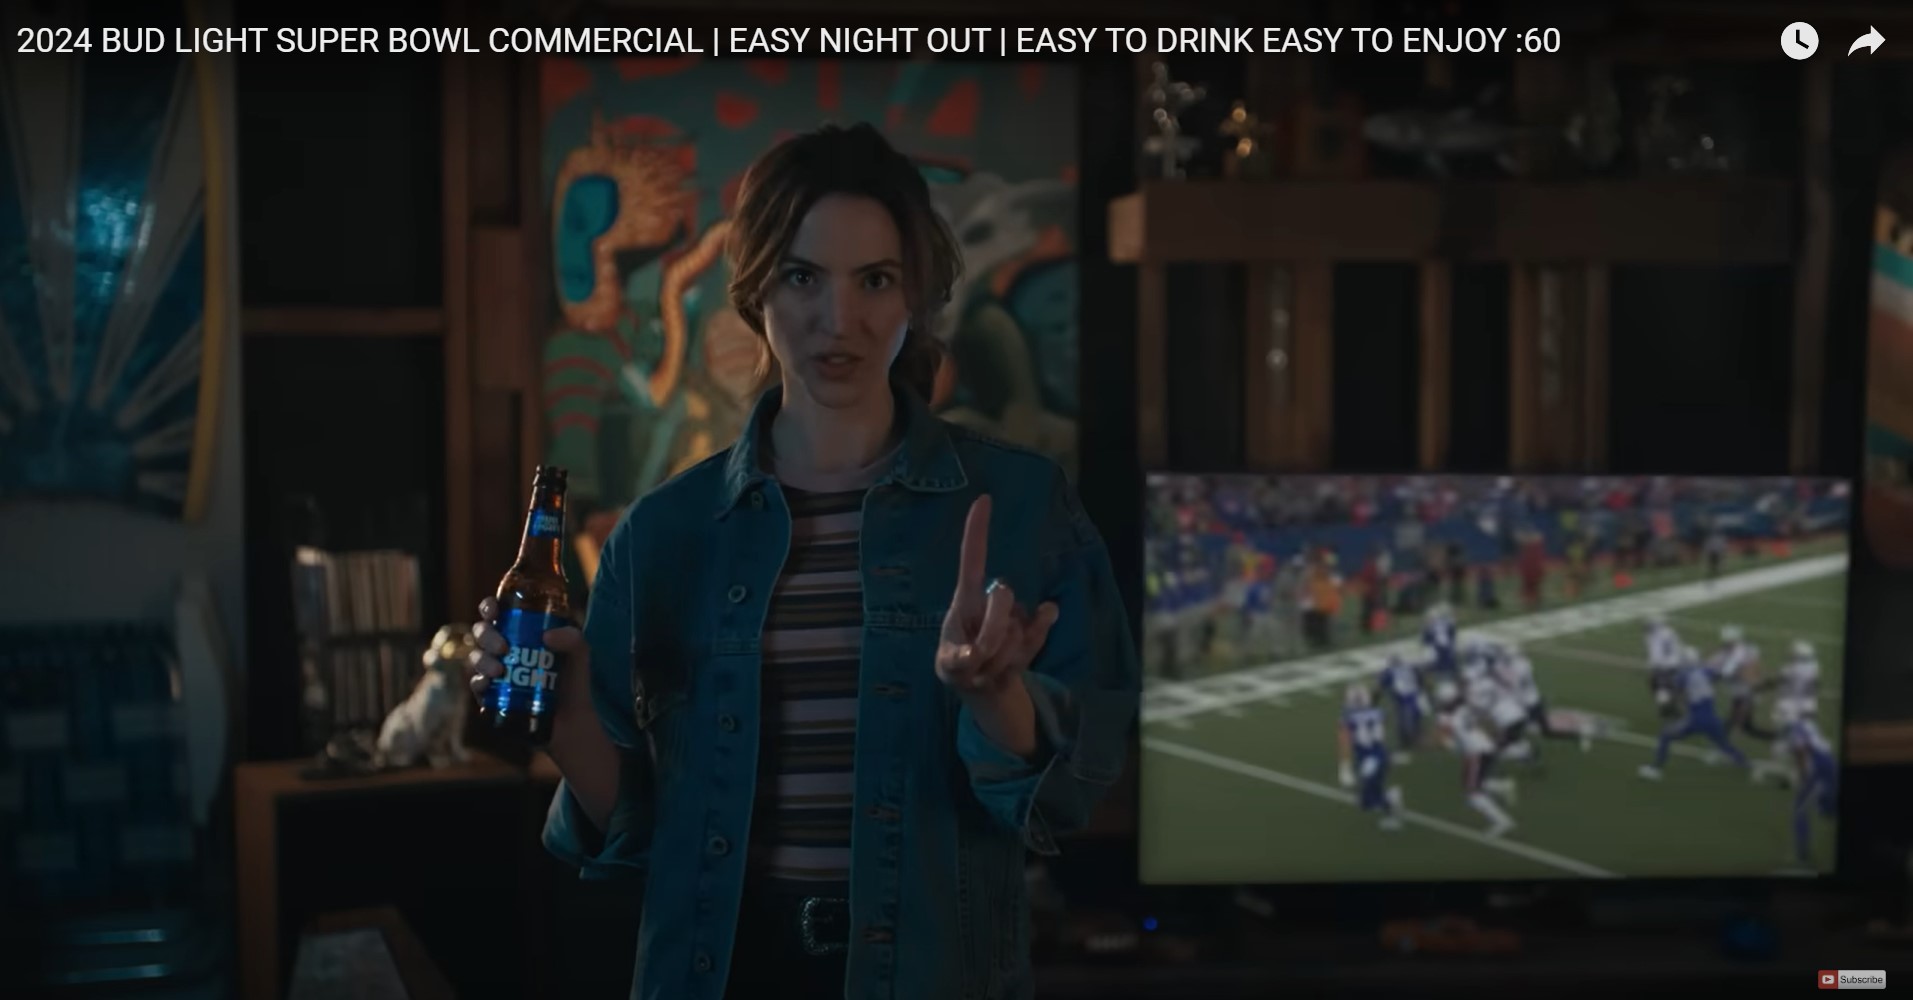 Screen capture from Bud Light's Super Bowl ad. 